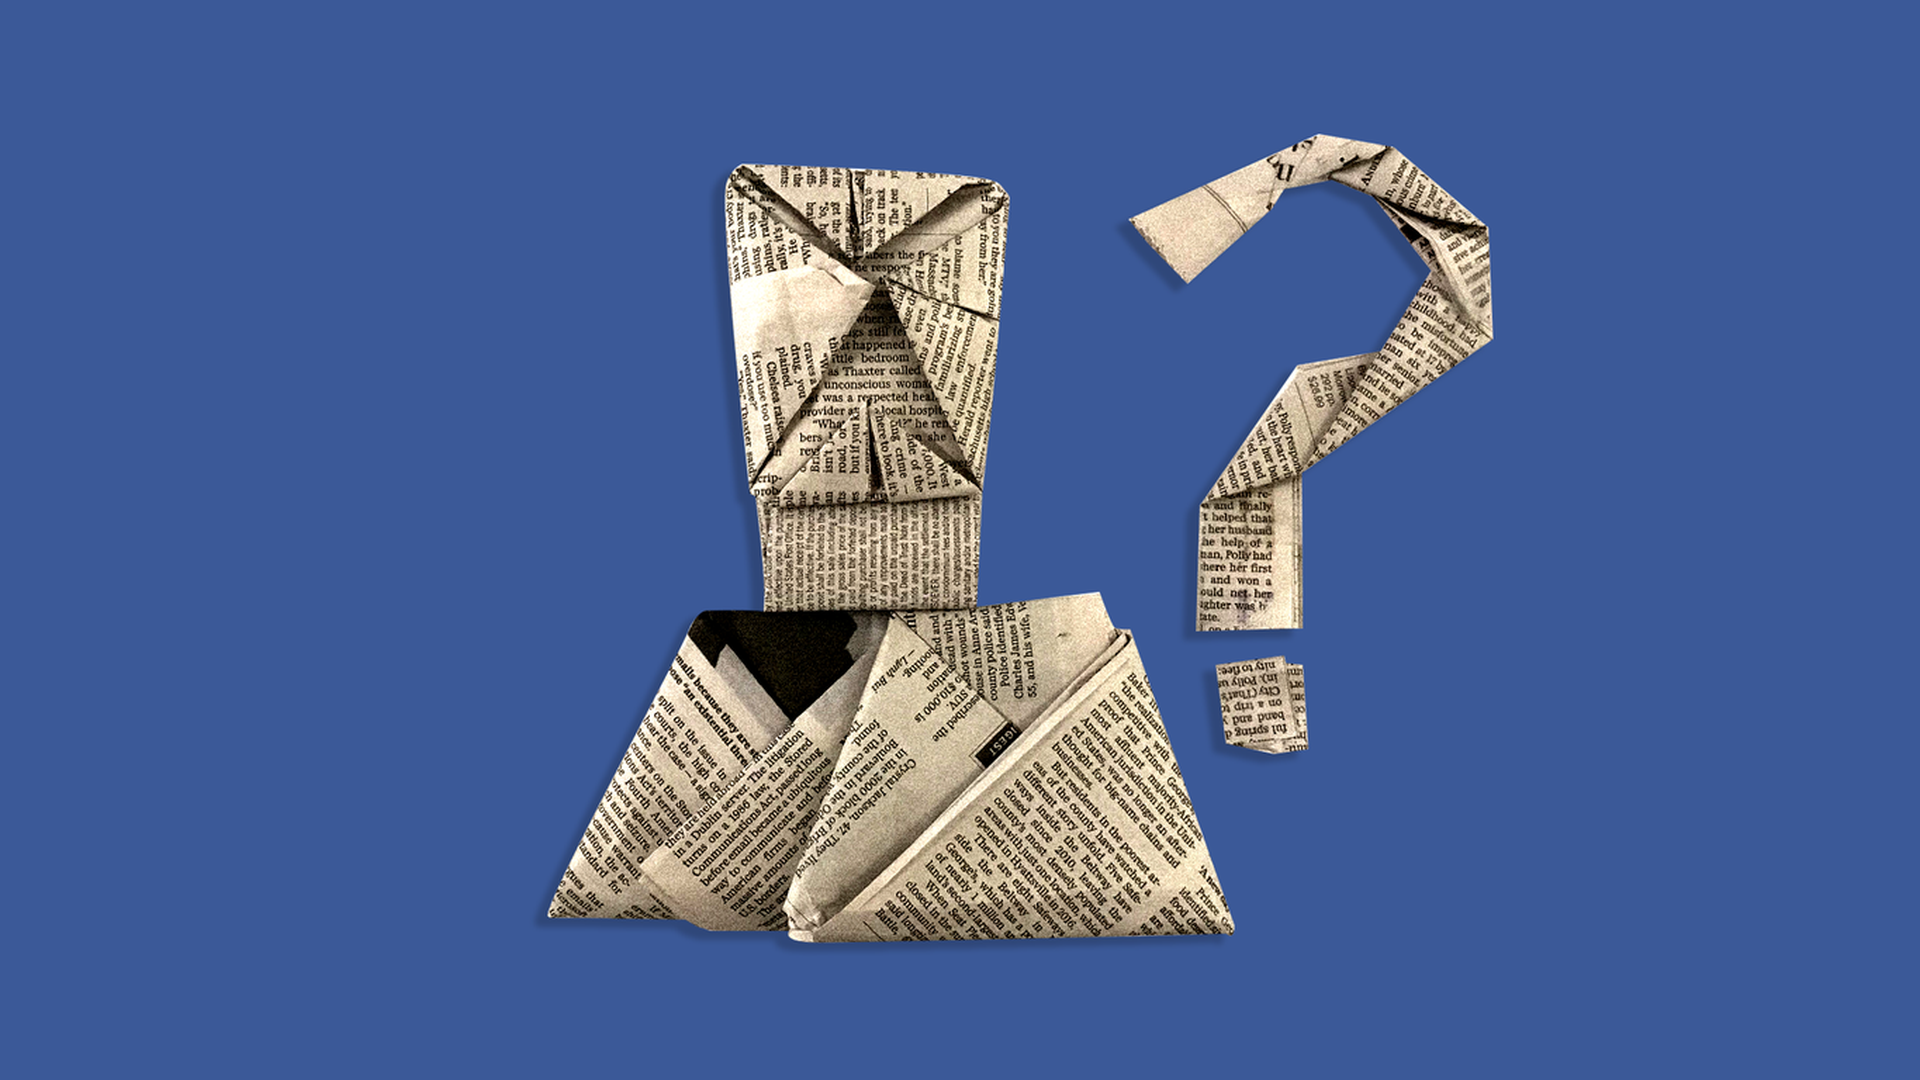 Illustration of folded up newspapers against a Facebook-blue-colored background